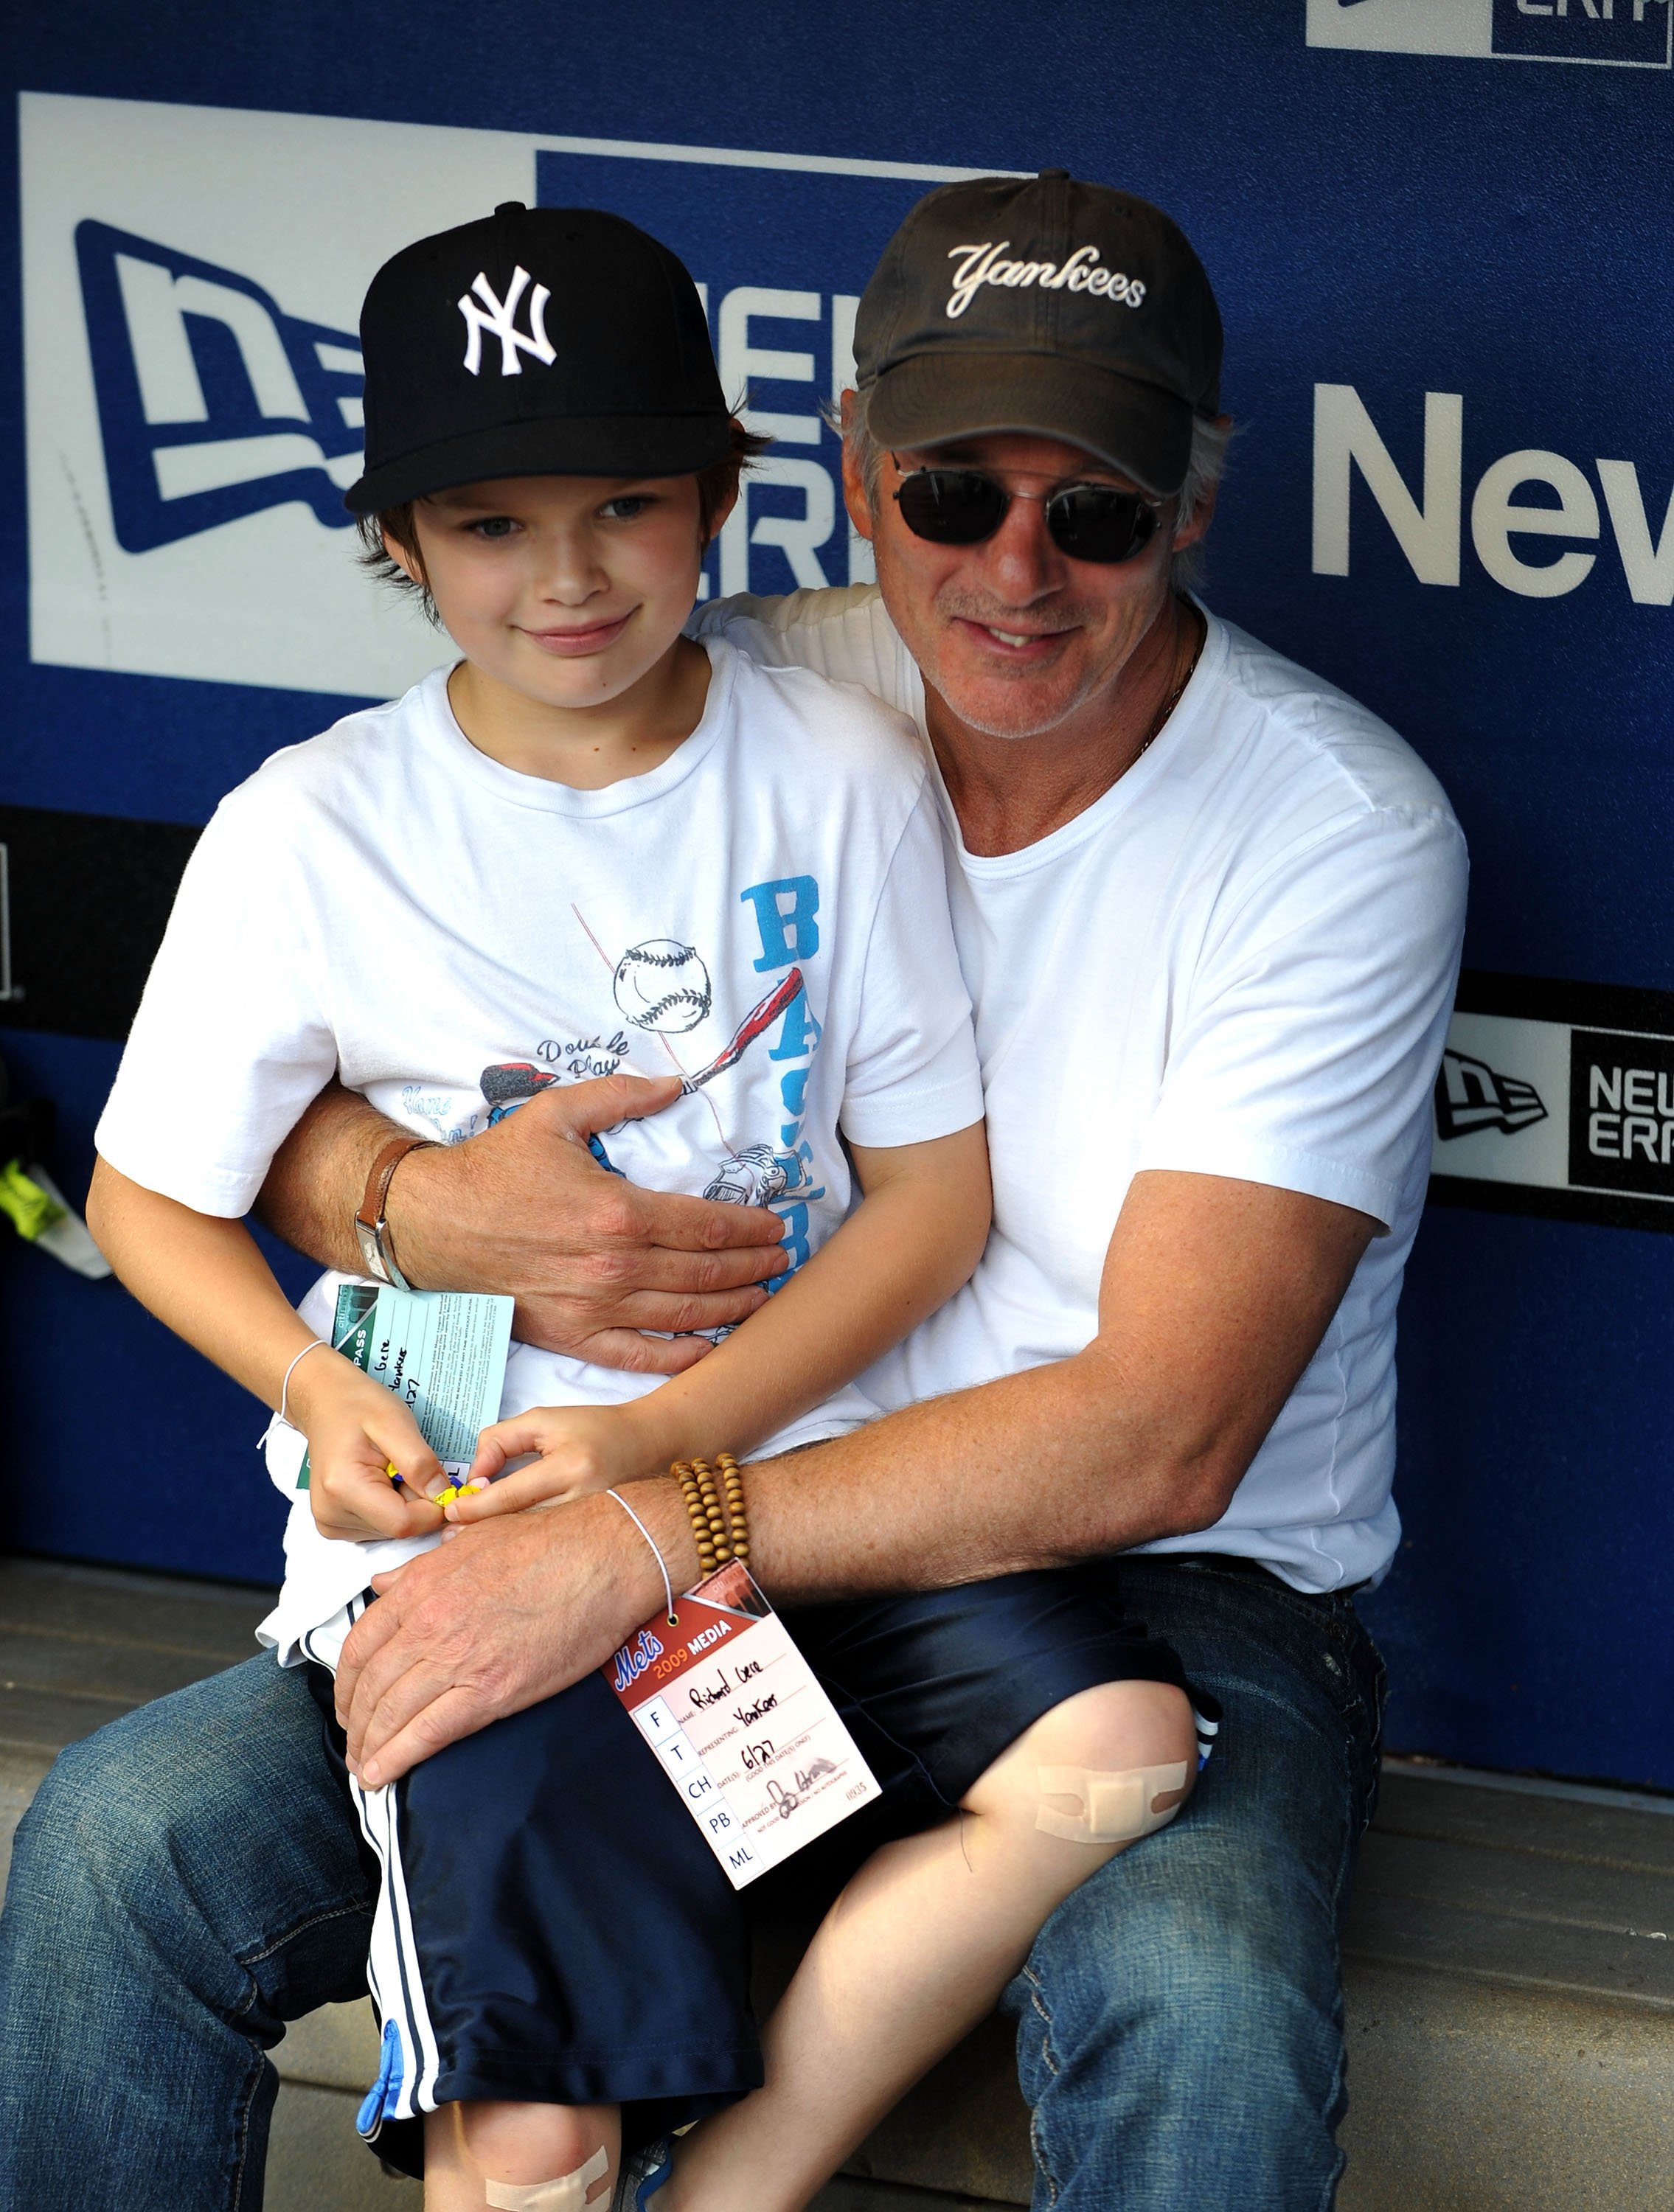 Richard Gere and his son Homer at the New York Subway Series game between the Mets and Yannkees at Citi Field on June 26, 2009 in New York, New York | Source: Getty Images 